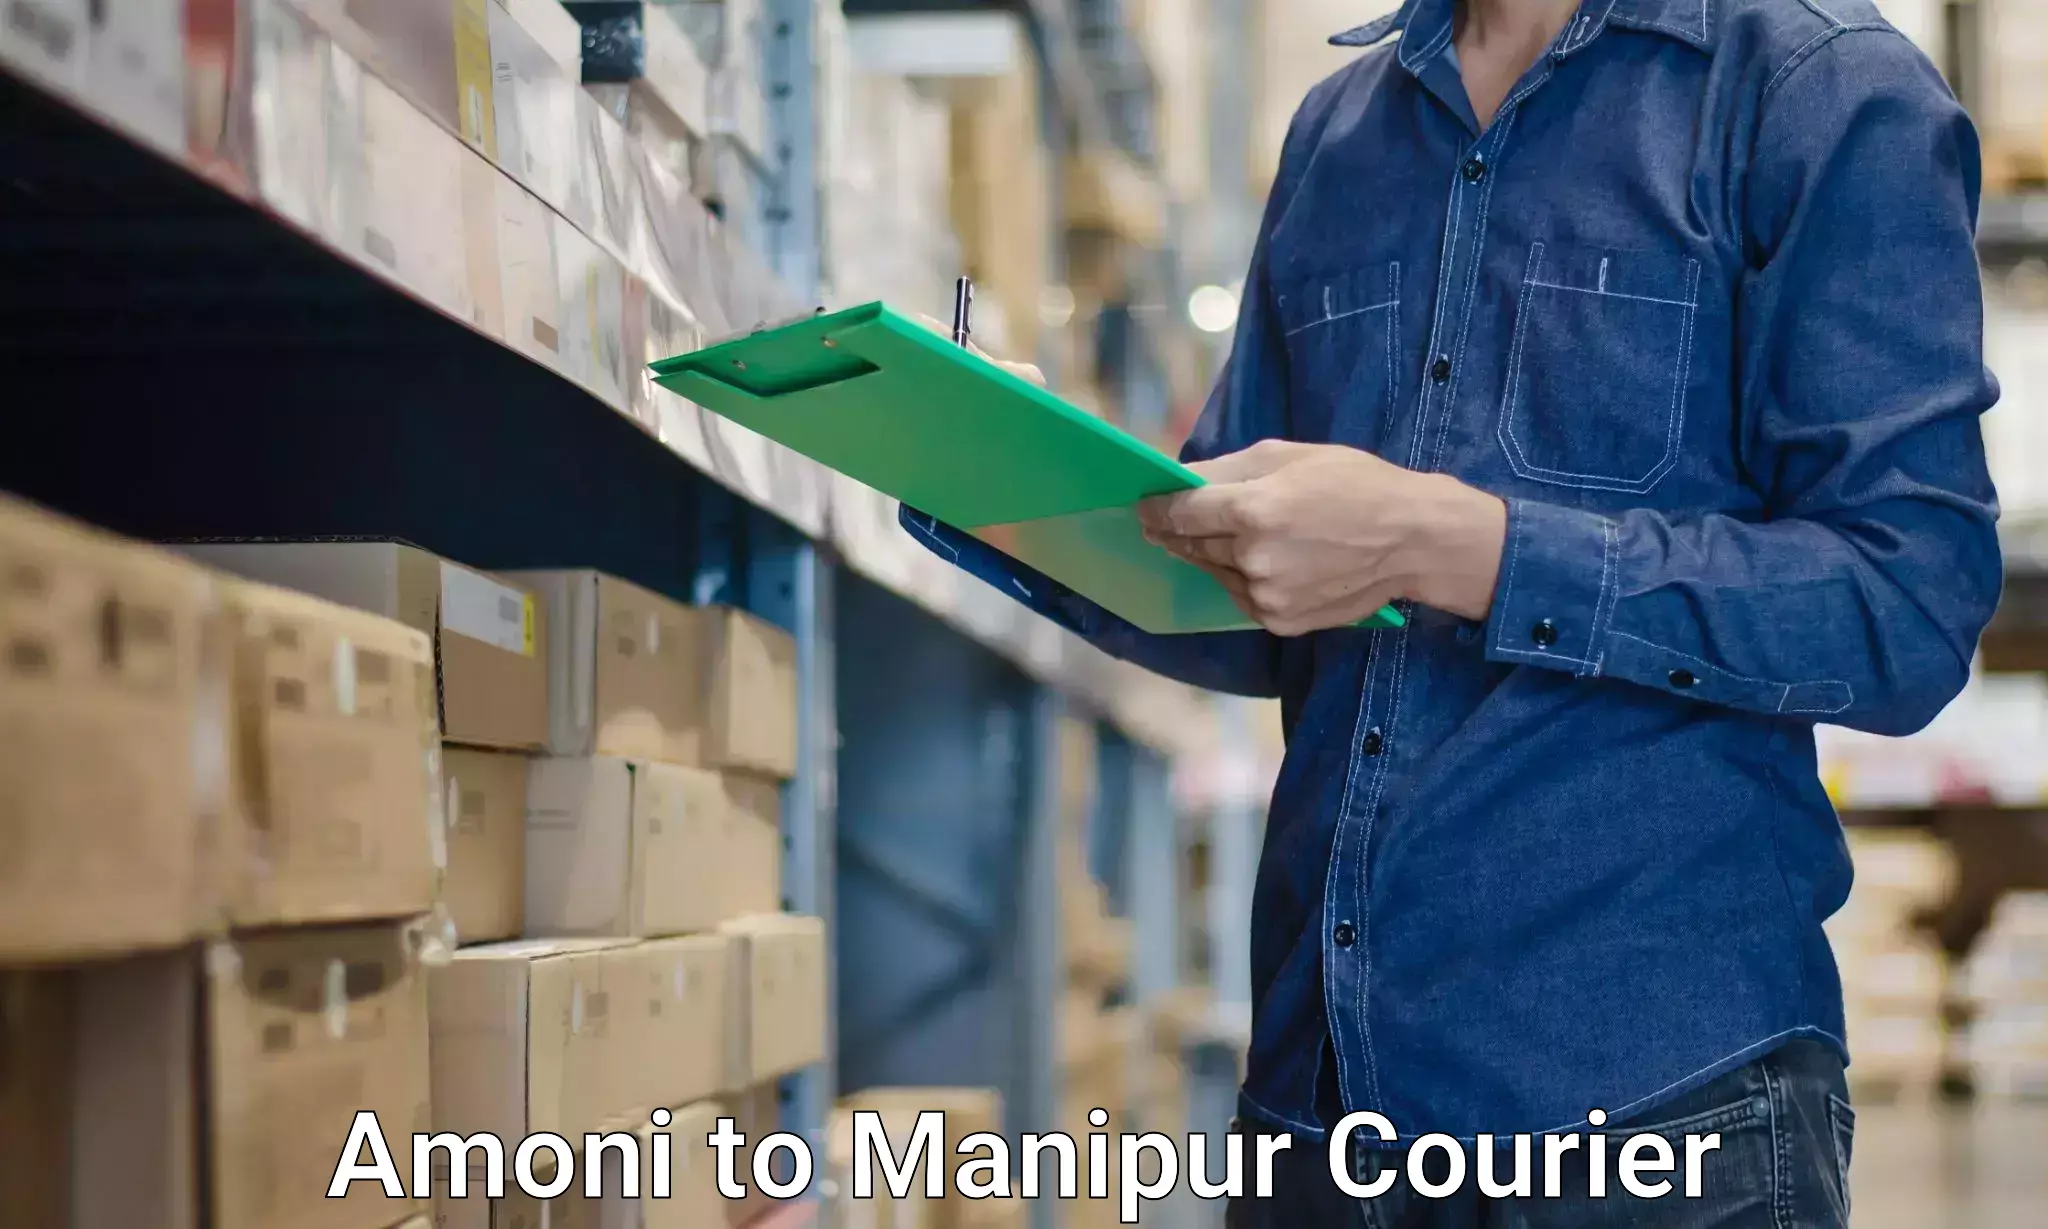 Furniture moving specialists Amoni to Manipur